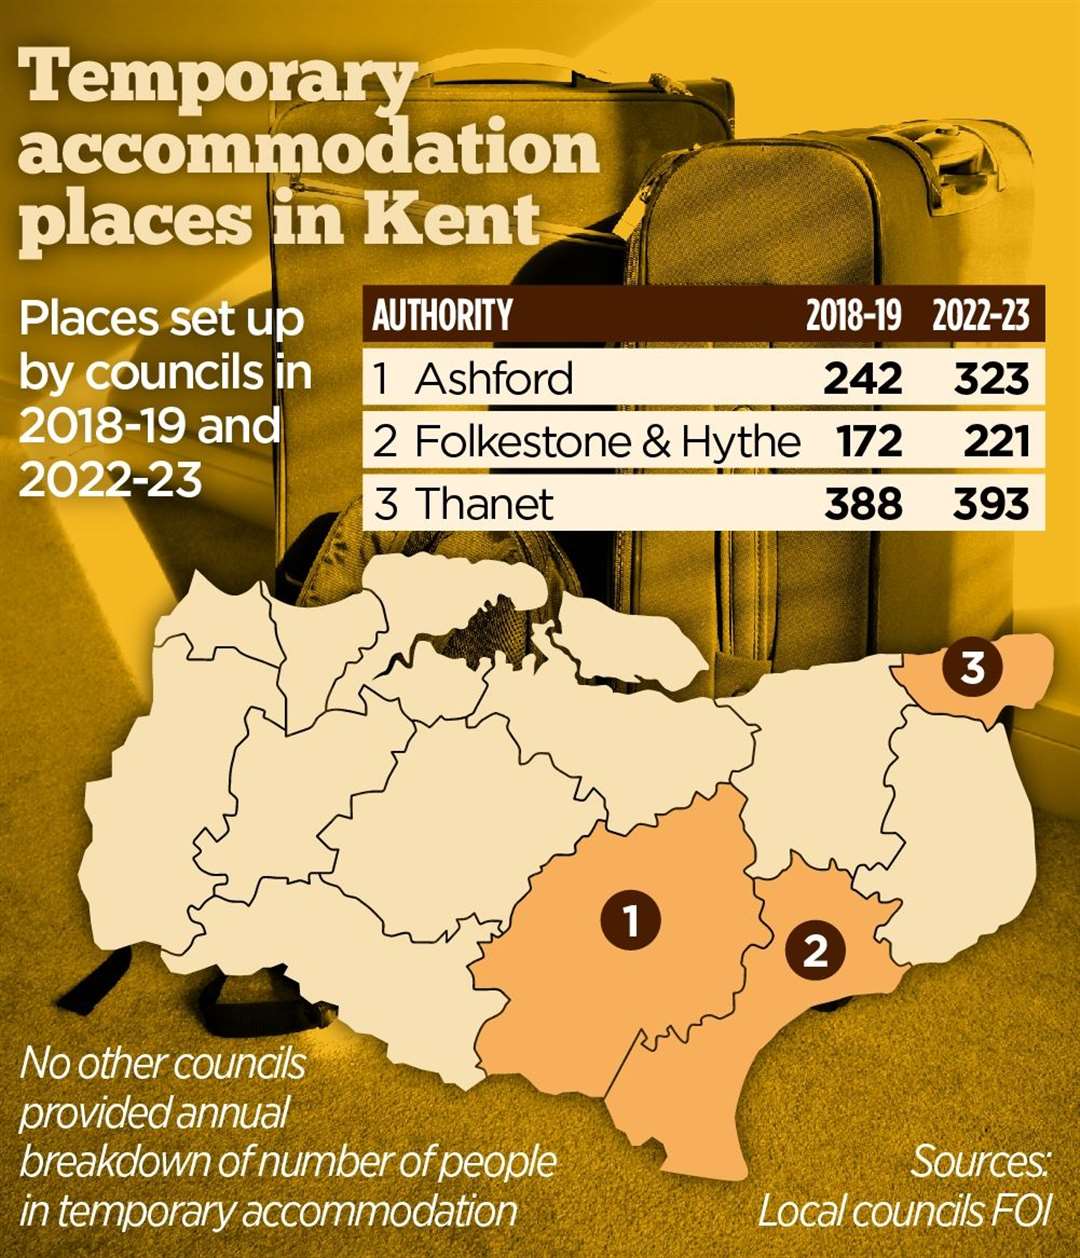 Ashford, Folkestone & Hythe and Thanet council offered a yearly breakdown of its temporary accommodation spending